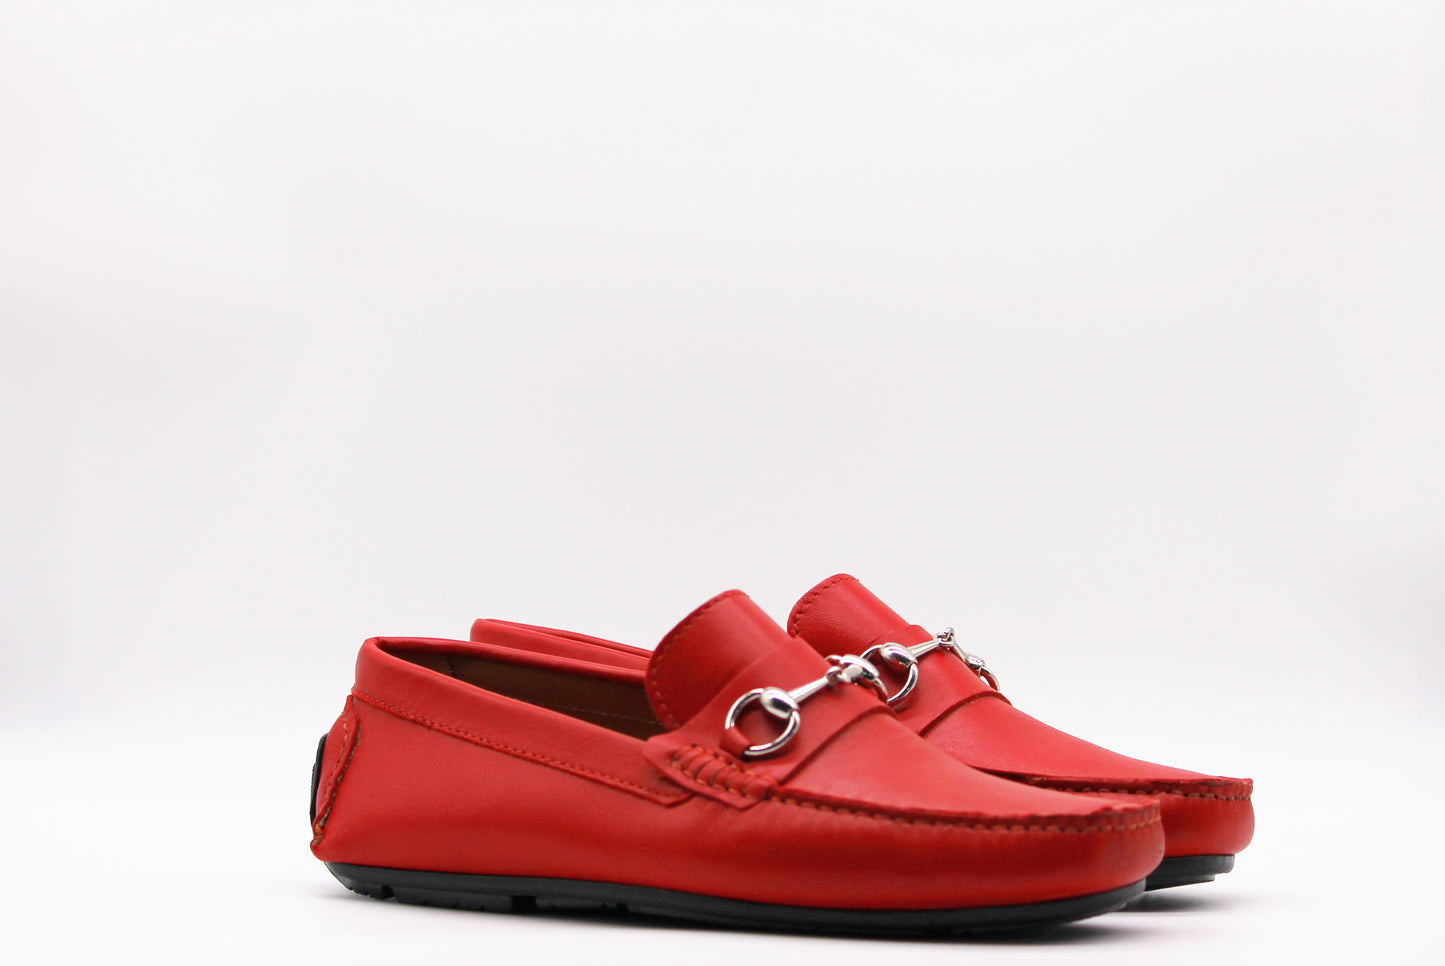 Adelie Loafers